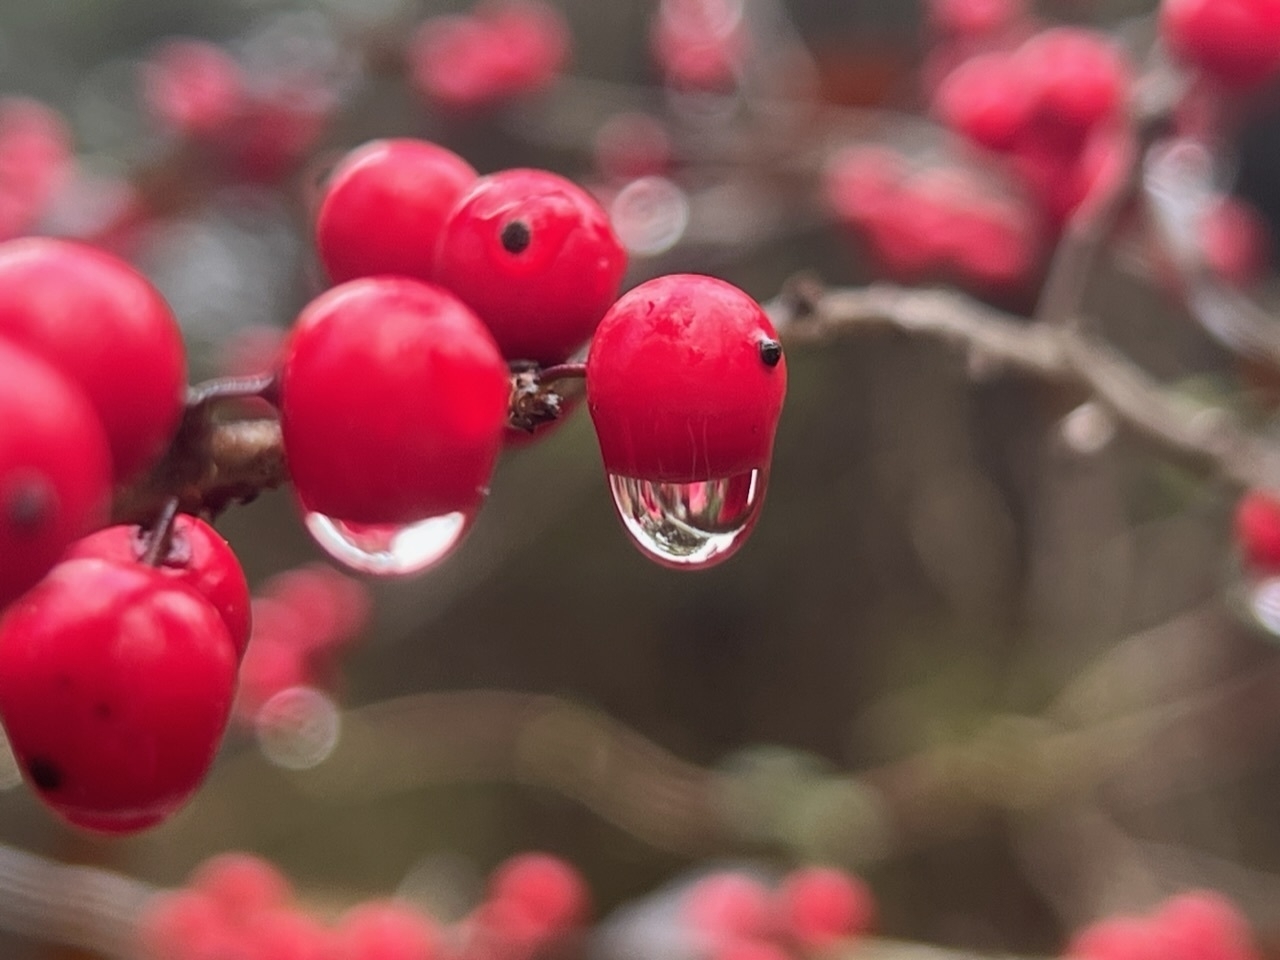 Very small, red, circular berries dripping with dew.